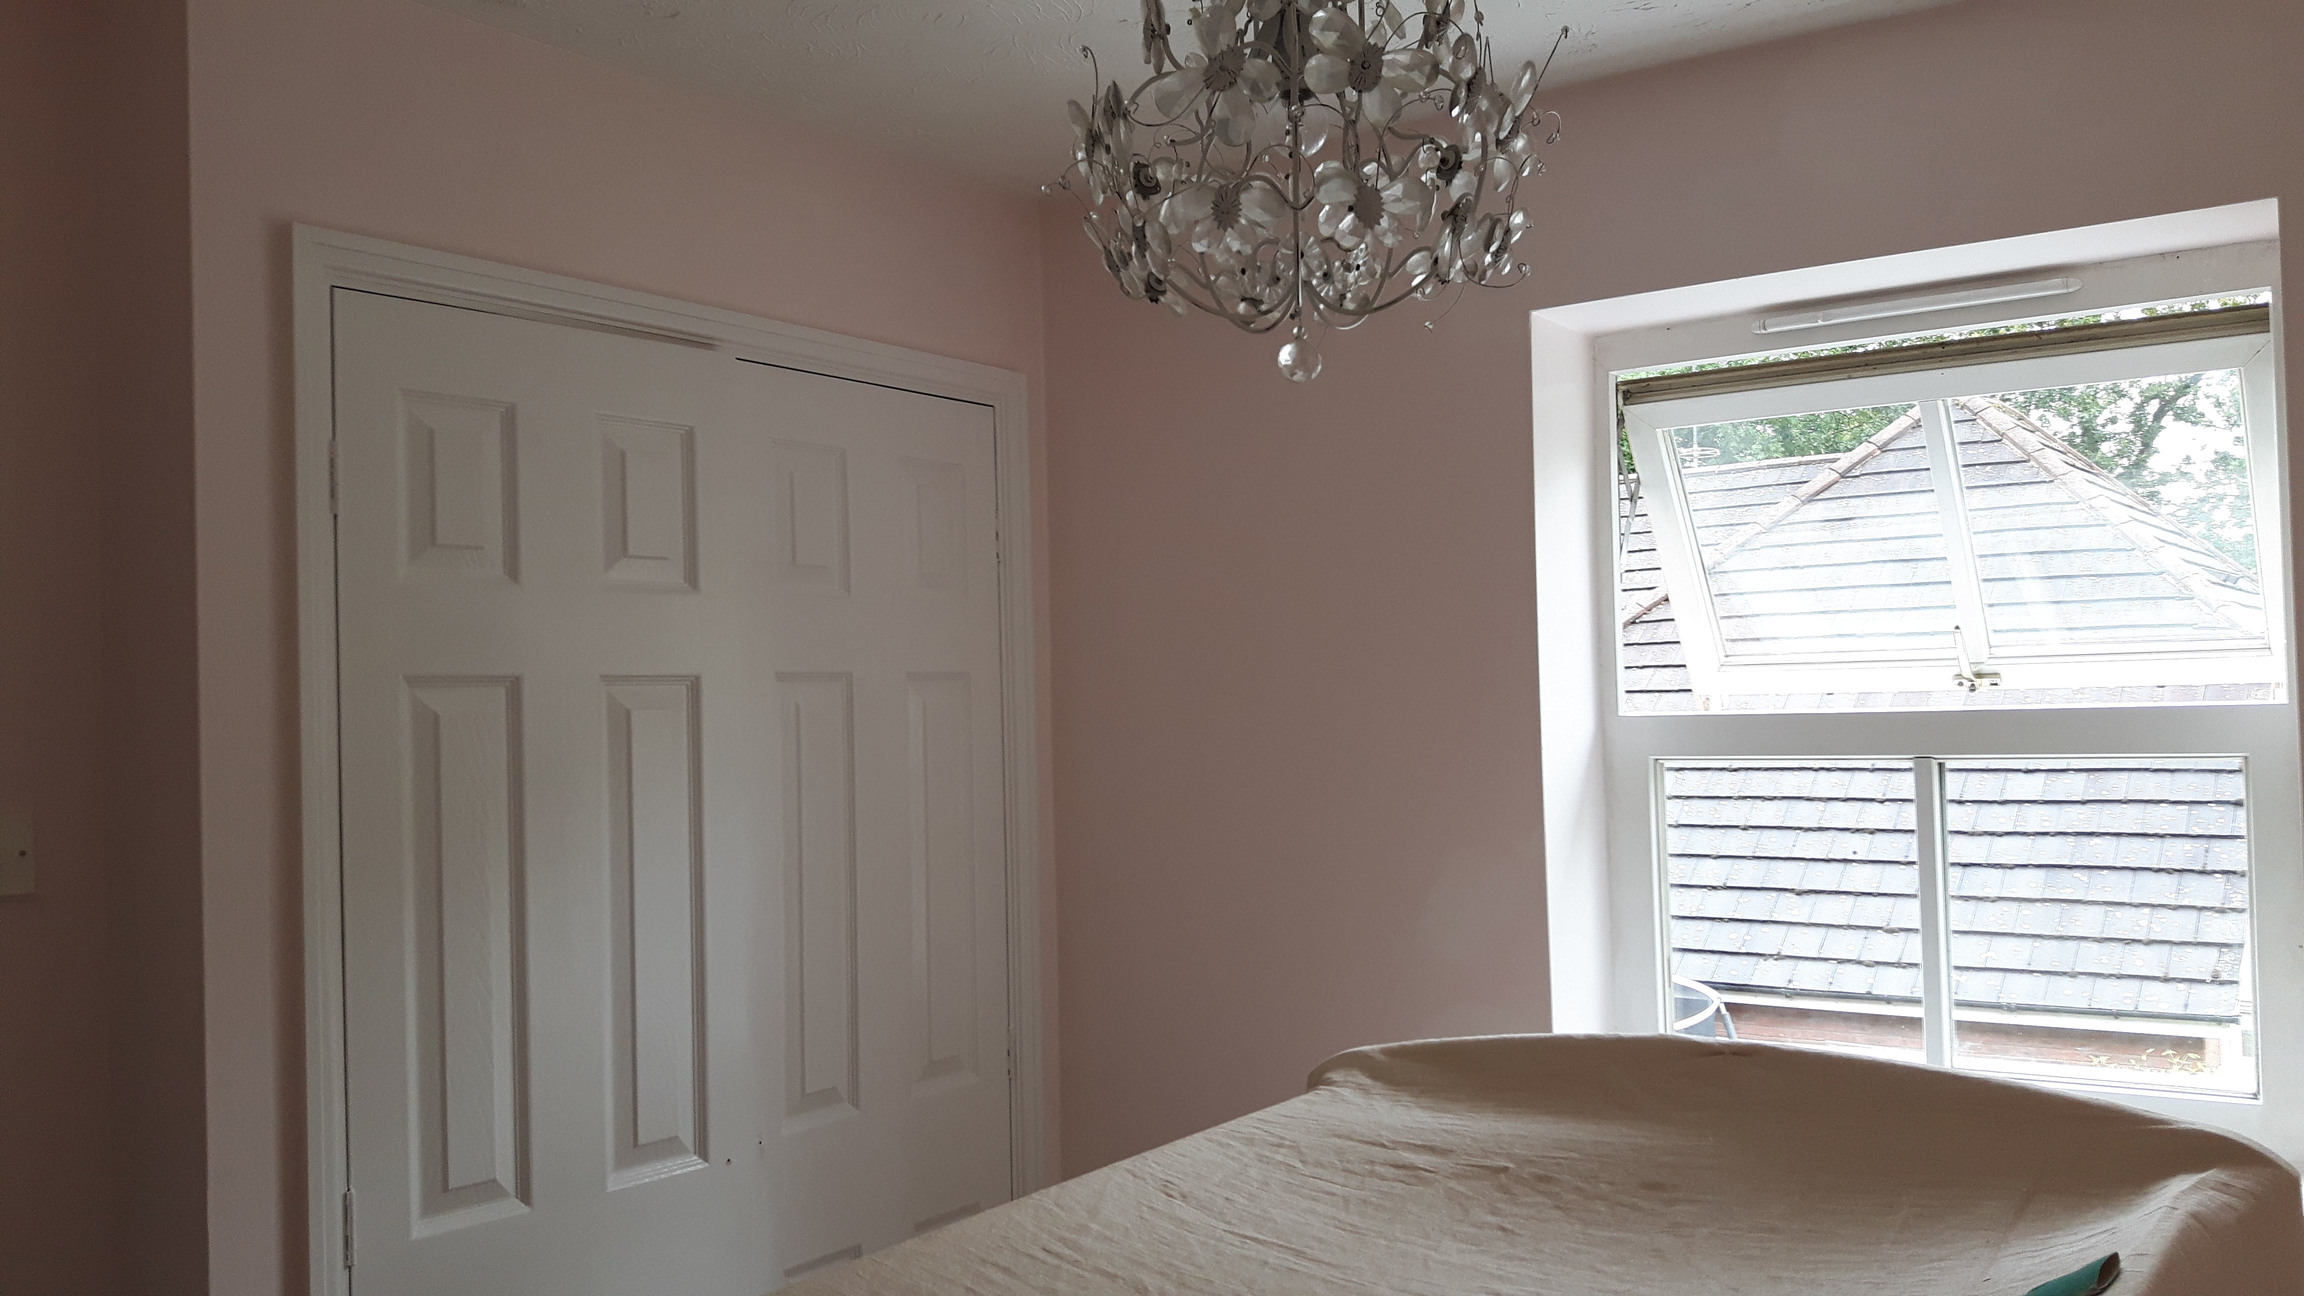 Newly painted bedroom in light pink